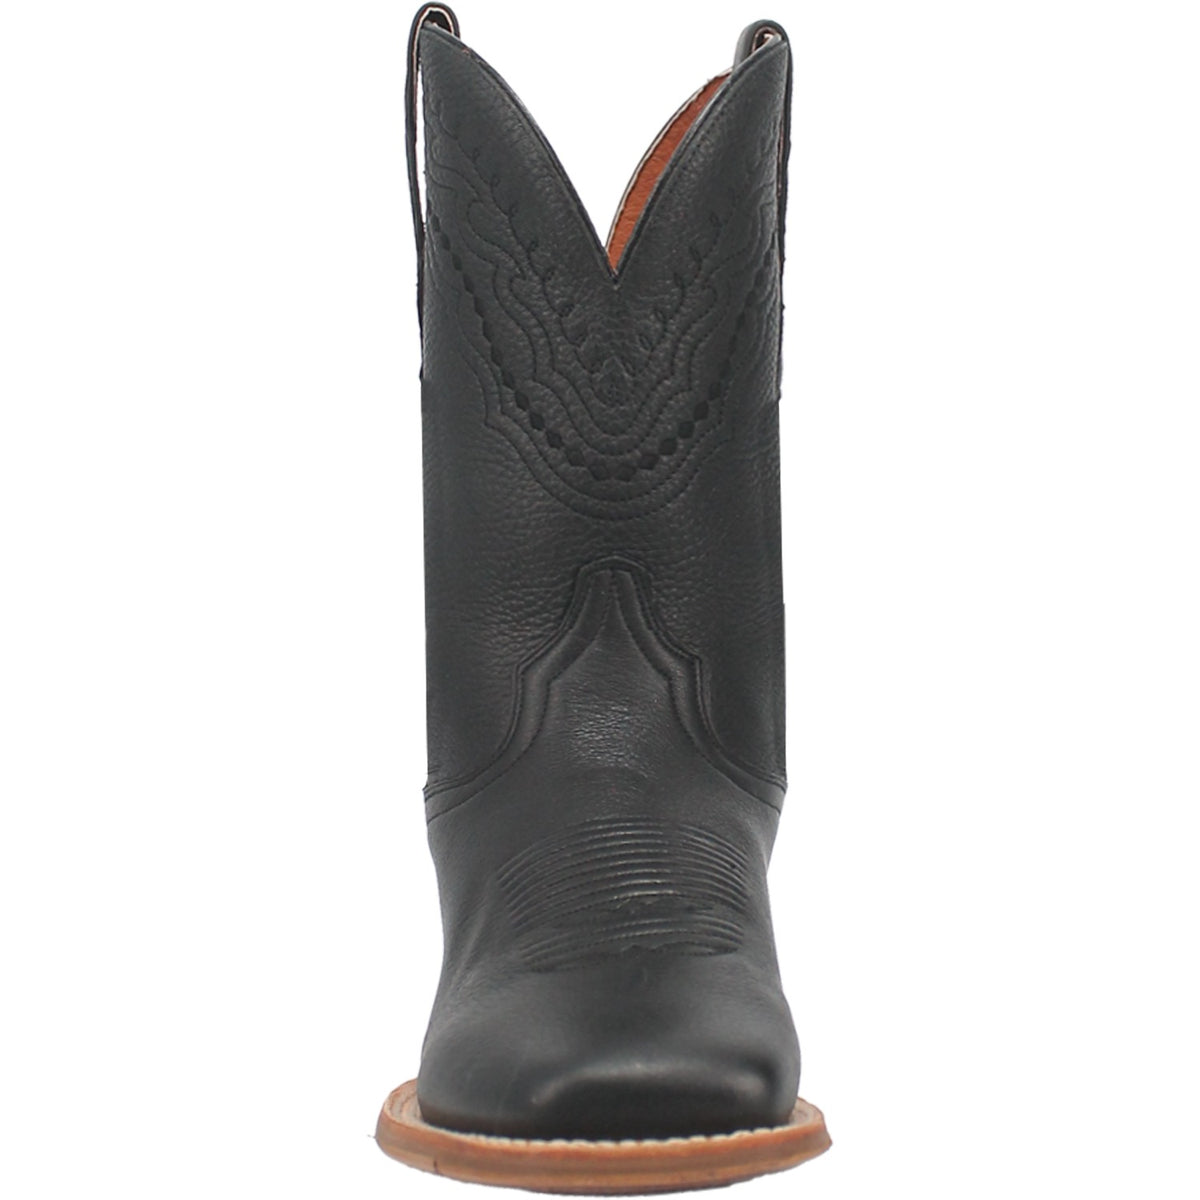 MILO LEATHER BOOT Cover